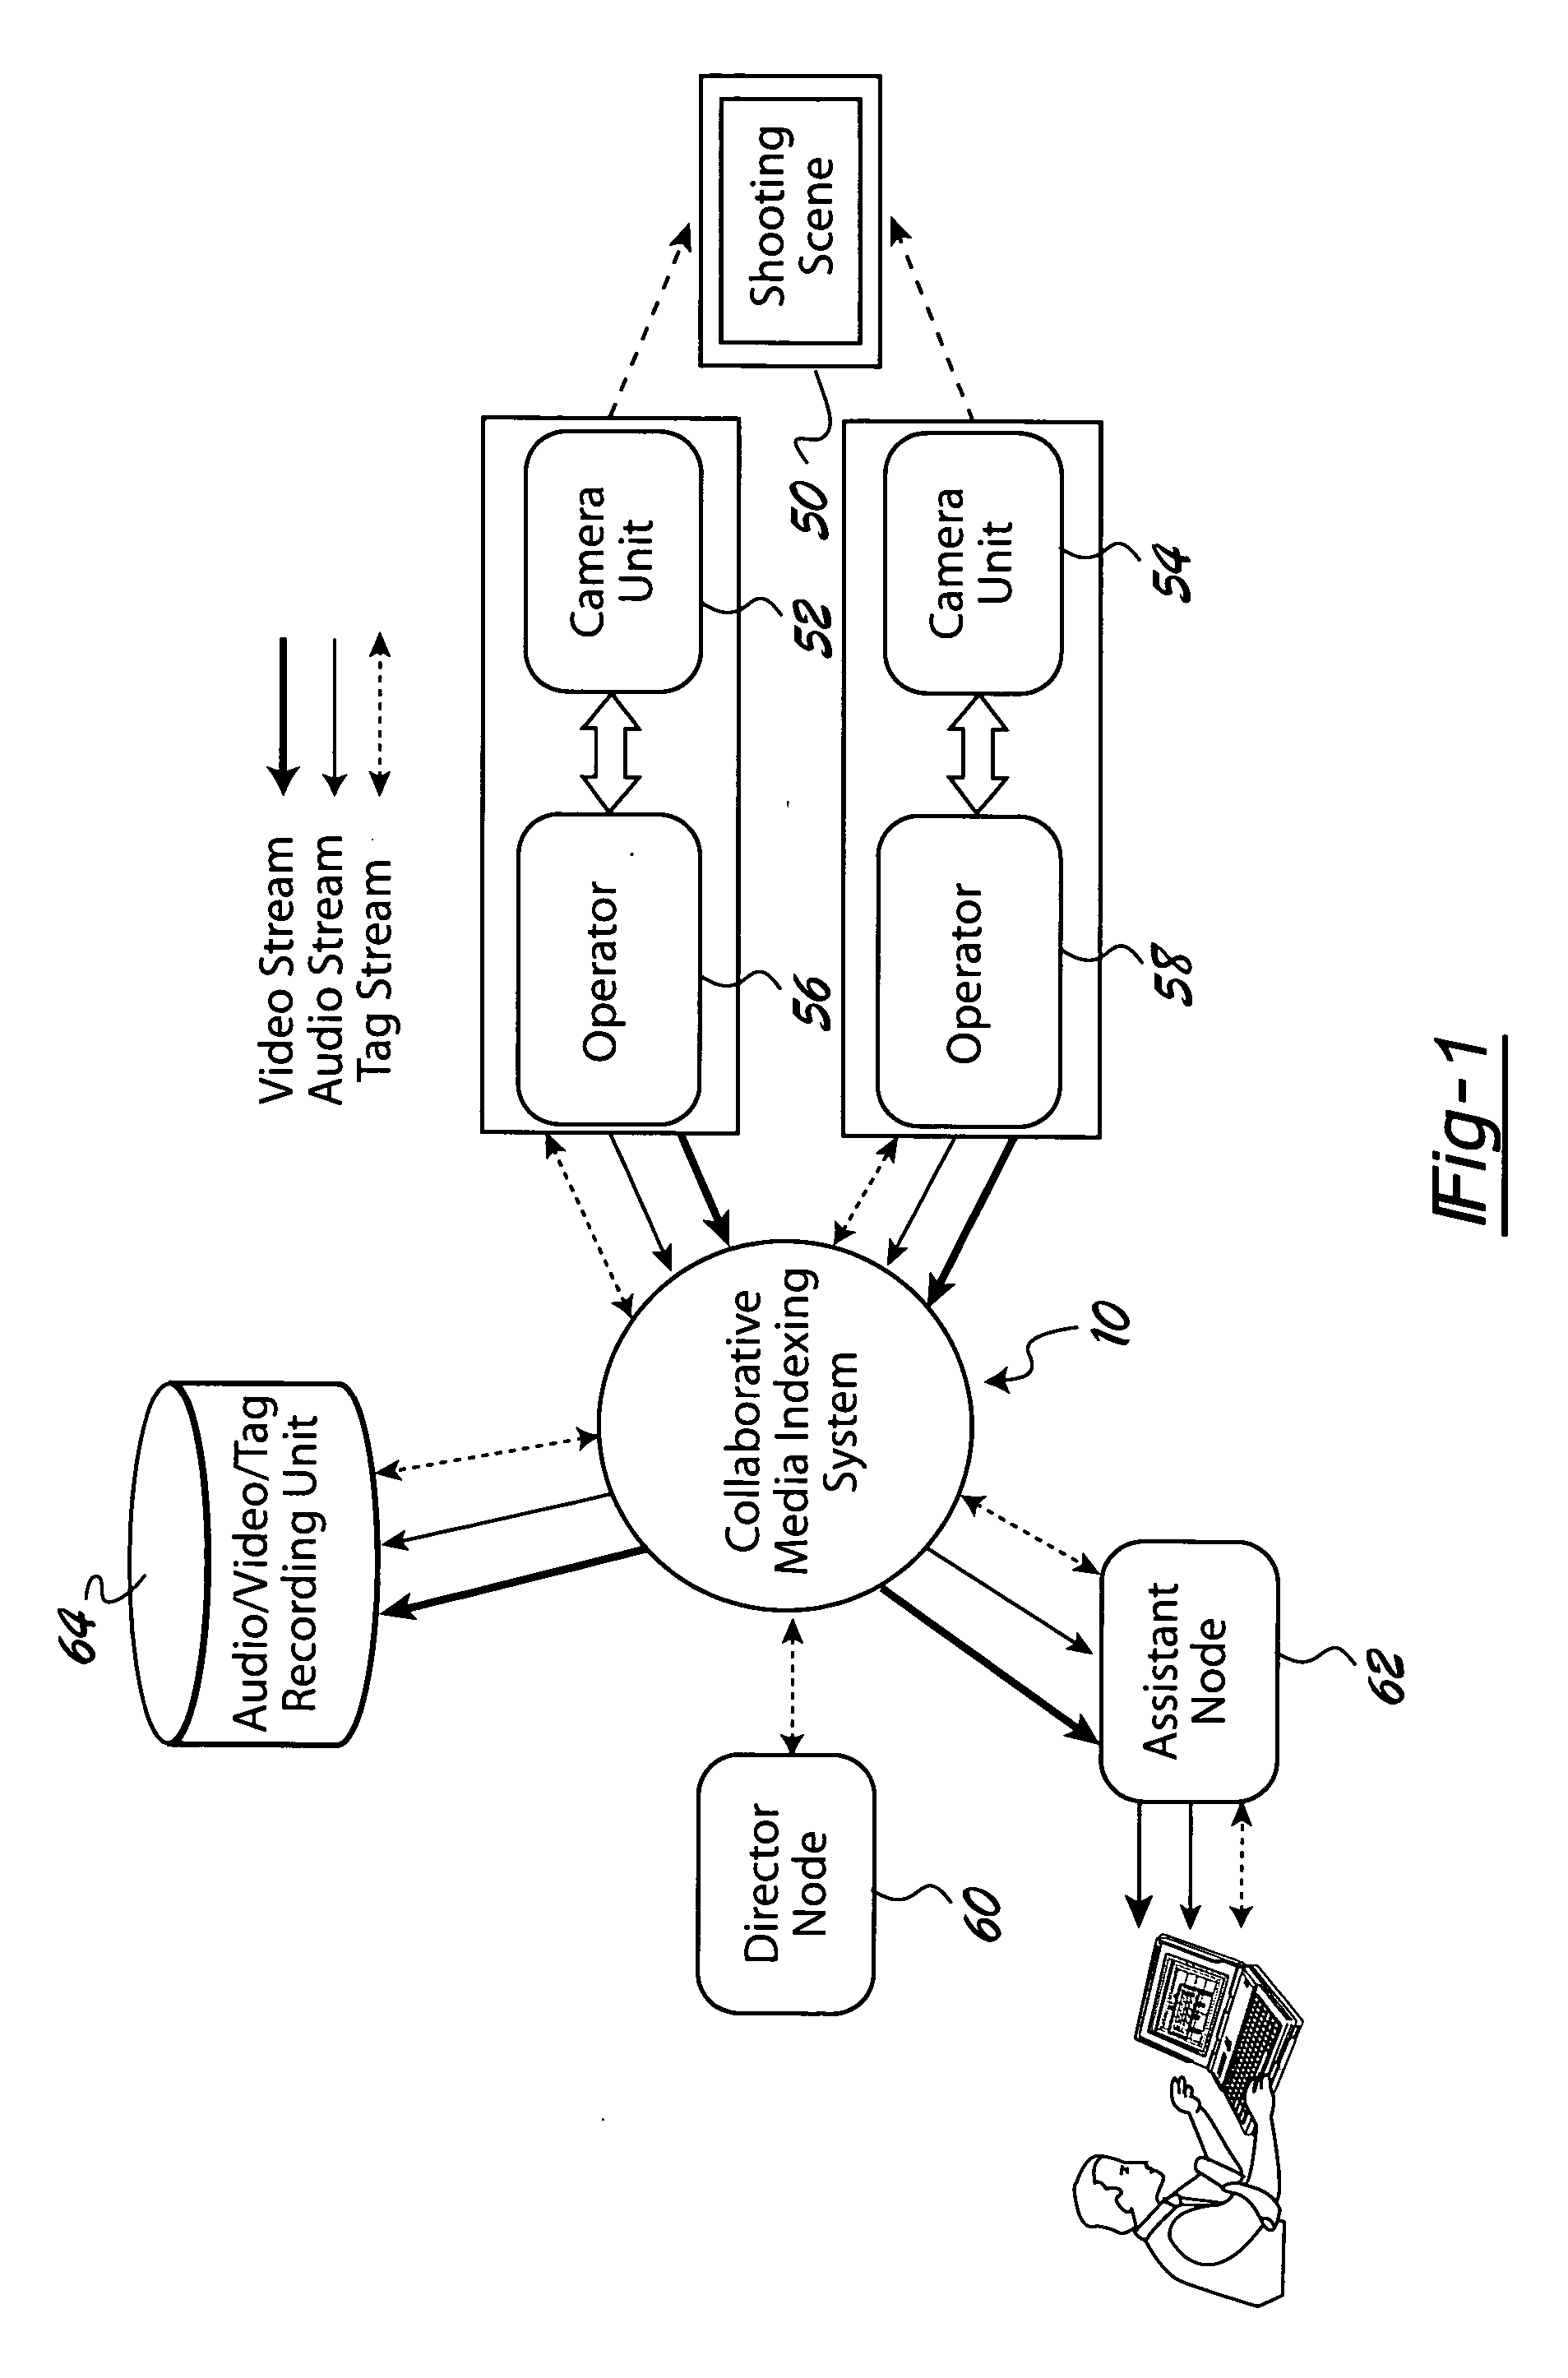 Collaborative media indexing system and method